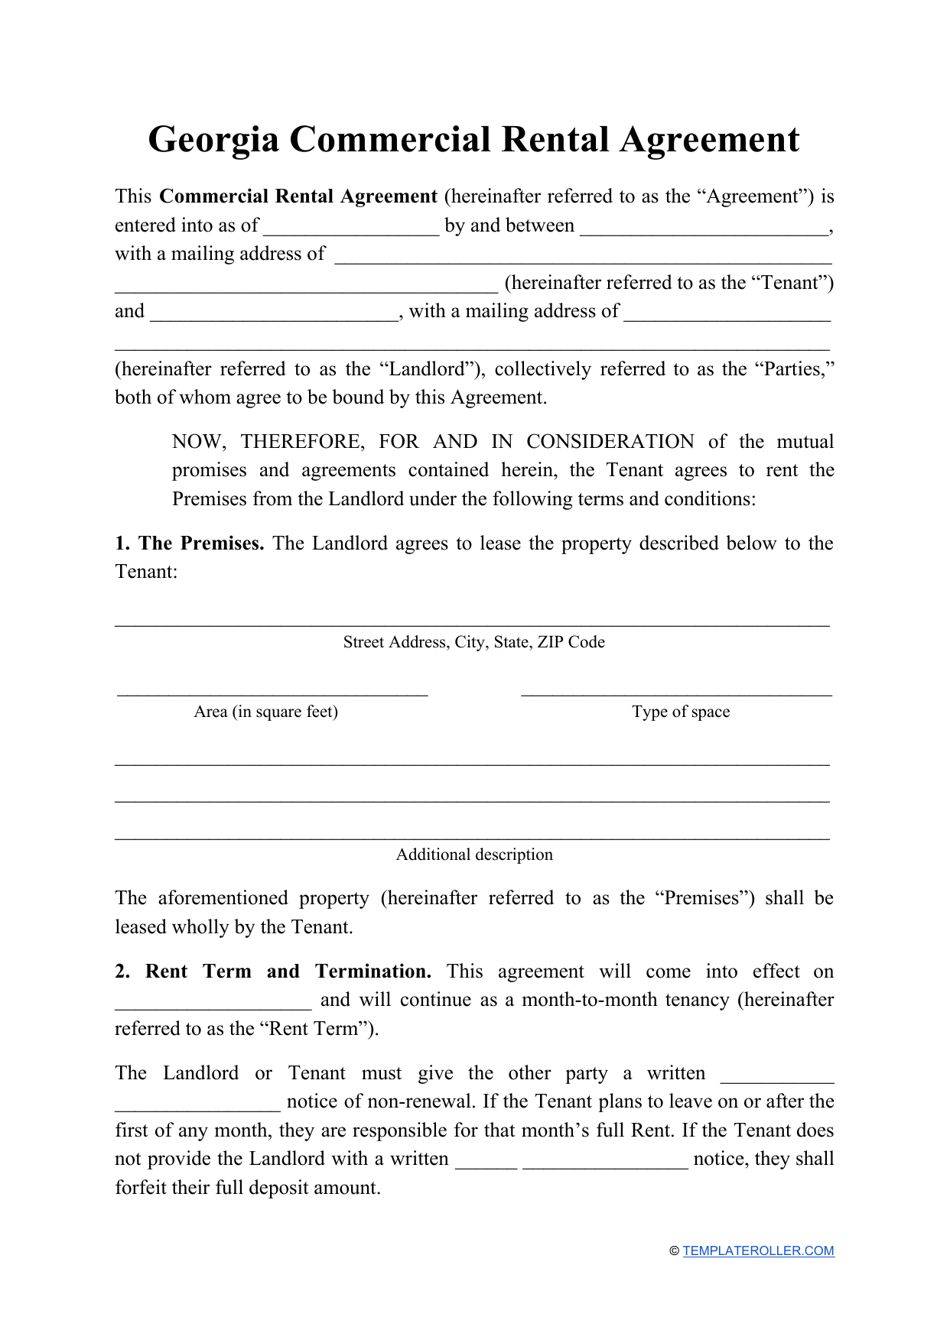 Commercial Rental Agreement Template - Georgia (United States), Page 1